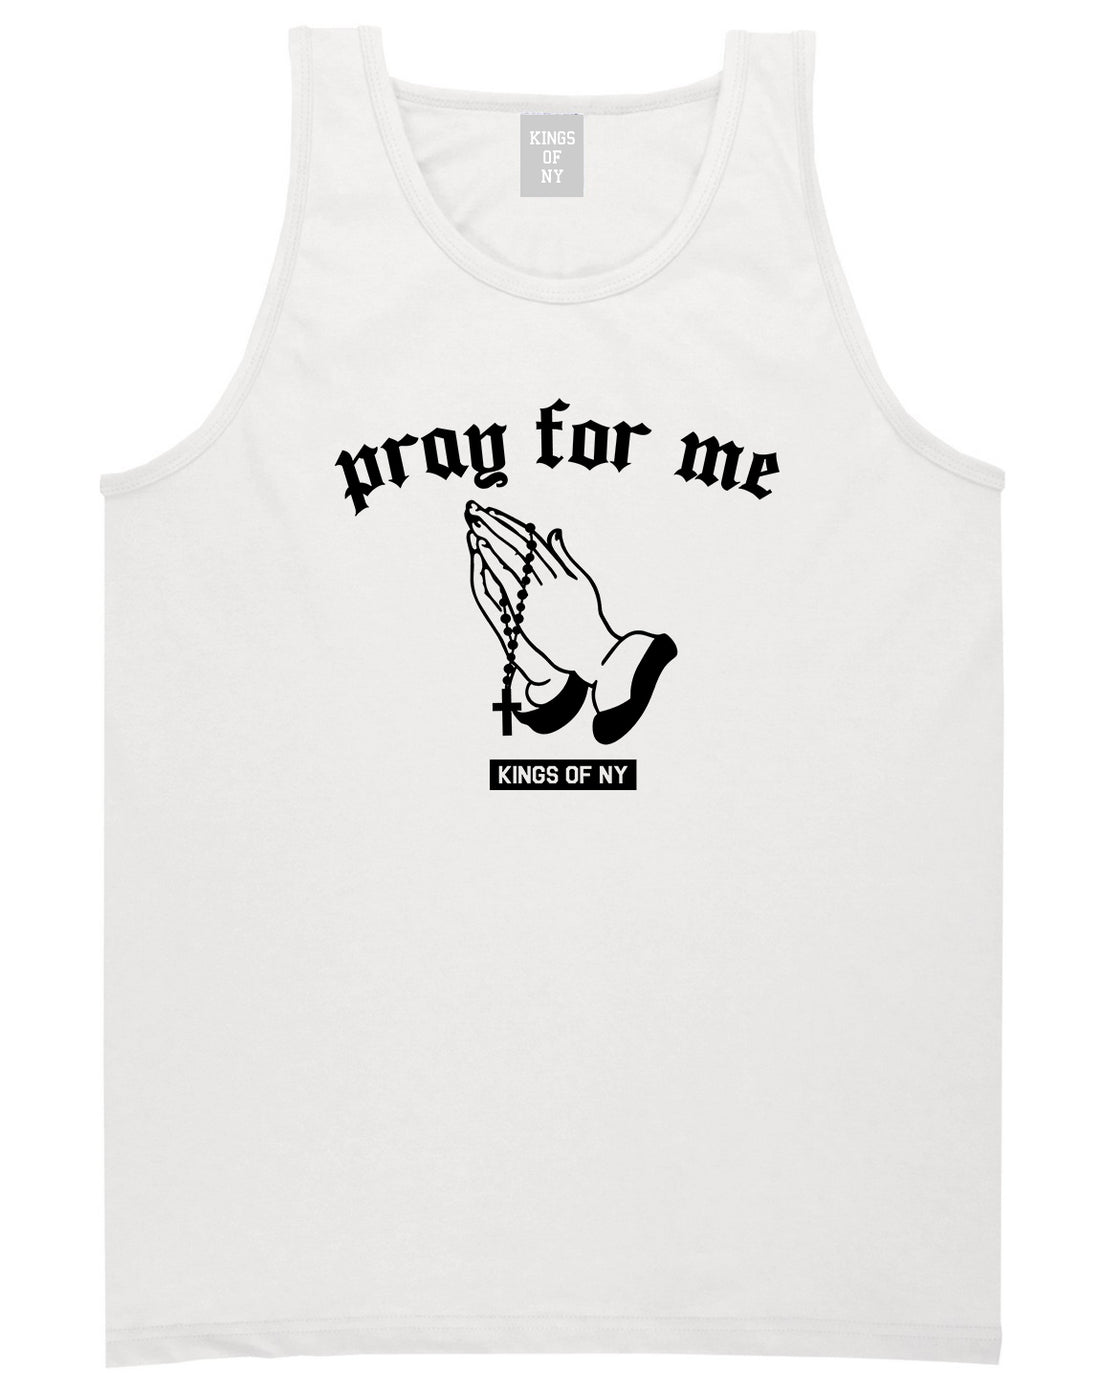 Pray For Me Mens Tank Top Shirt White by Kings Of NY